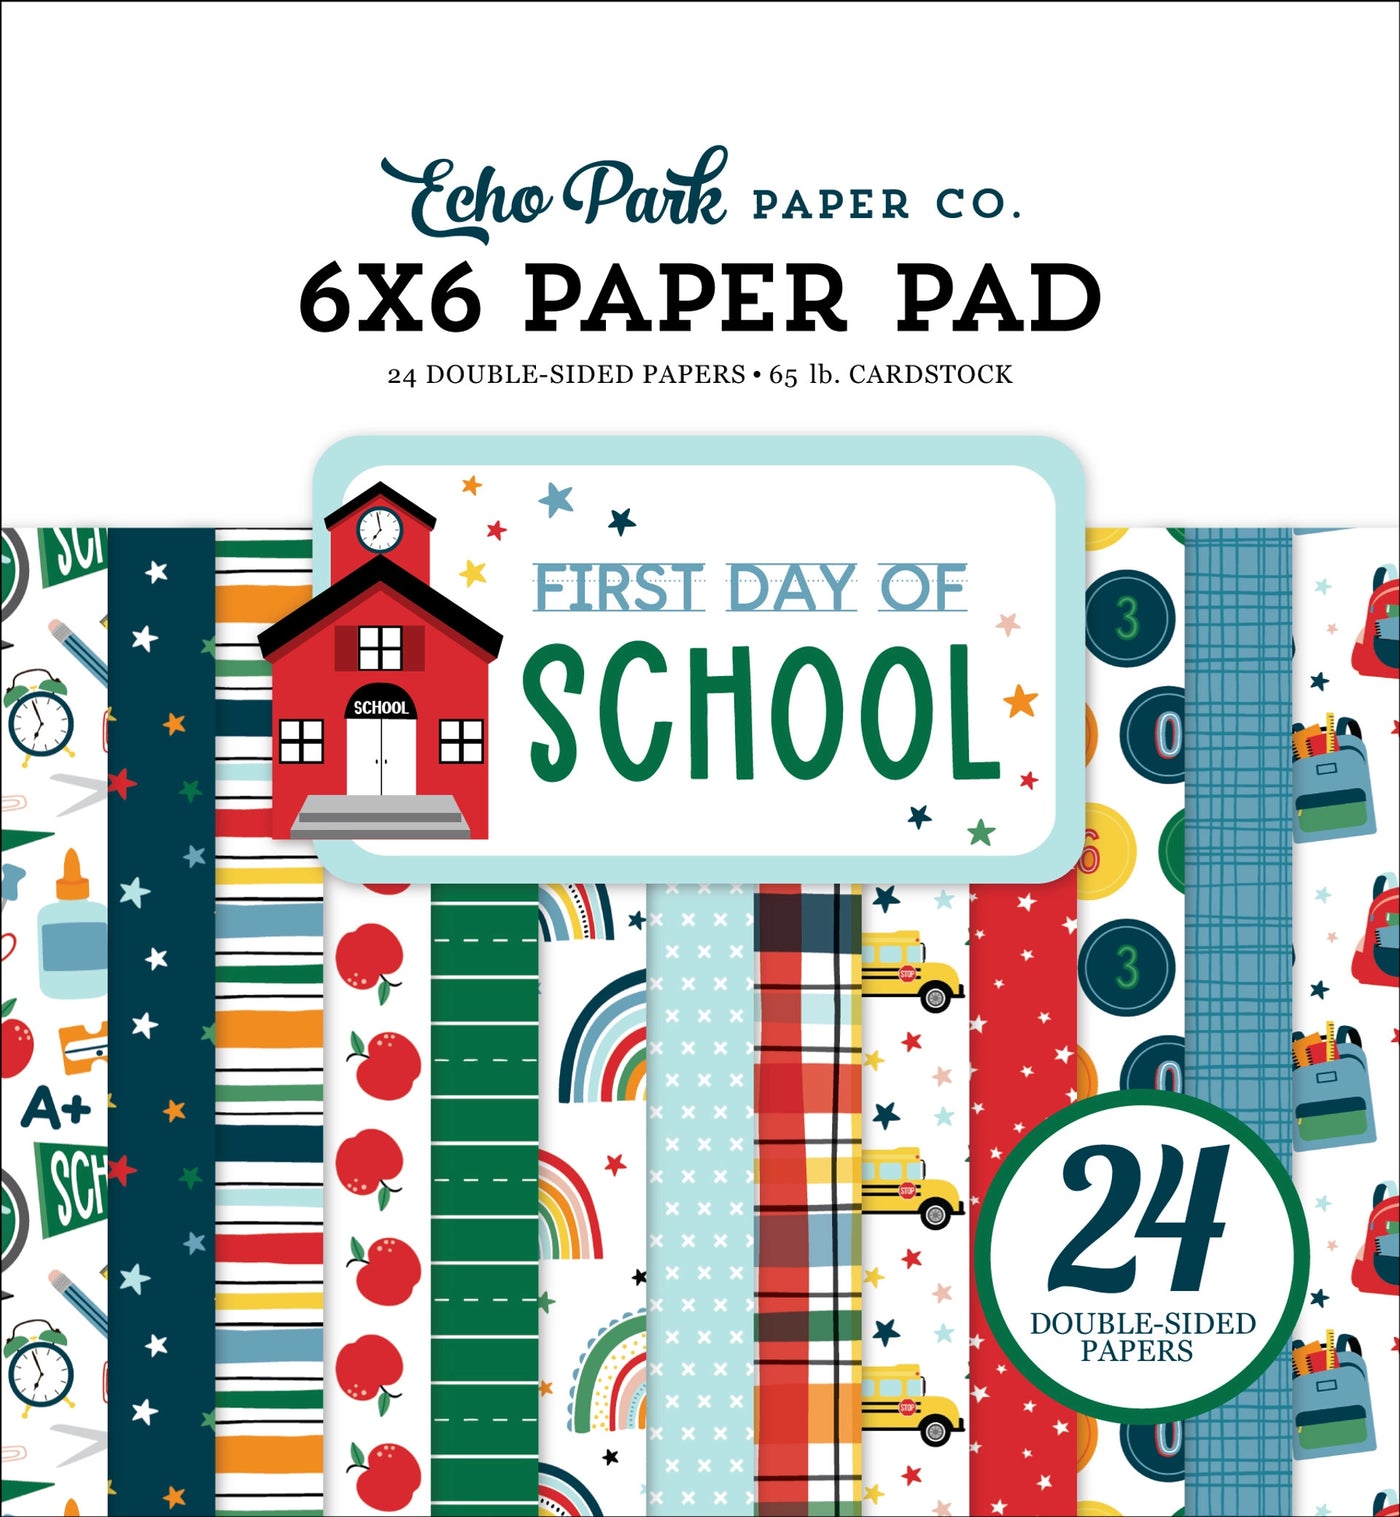 6x6 pad recalls school days and related paraphernalia. Fun for cards and papercrafts.; includes 24 double-sided pages.